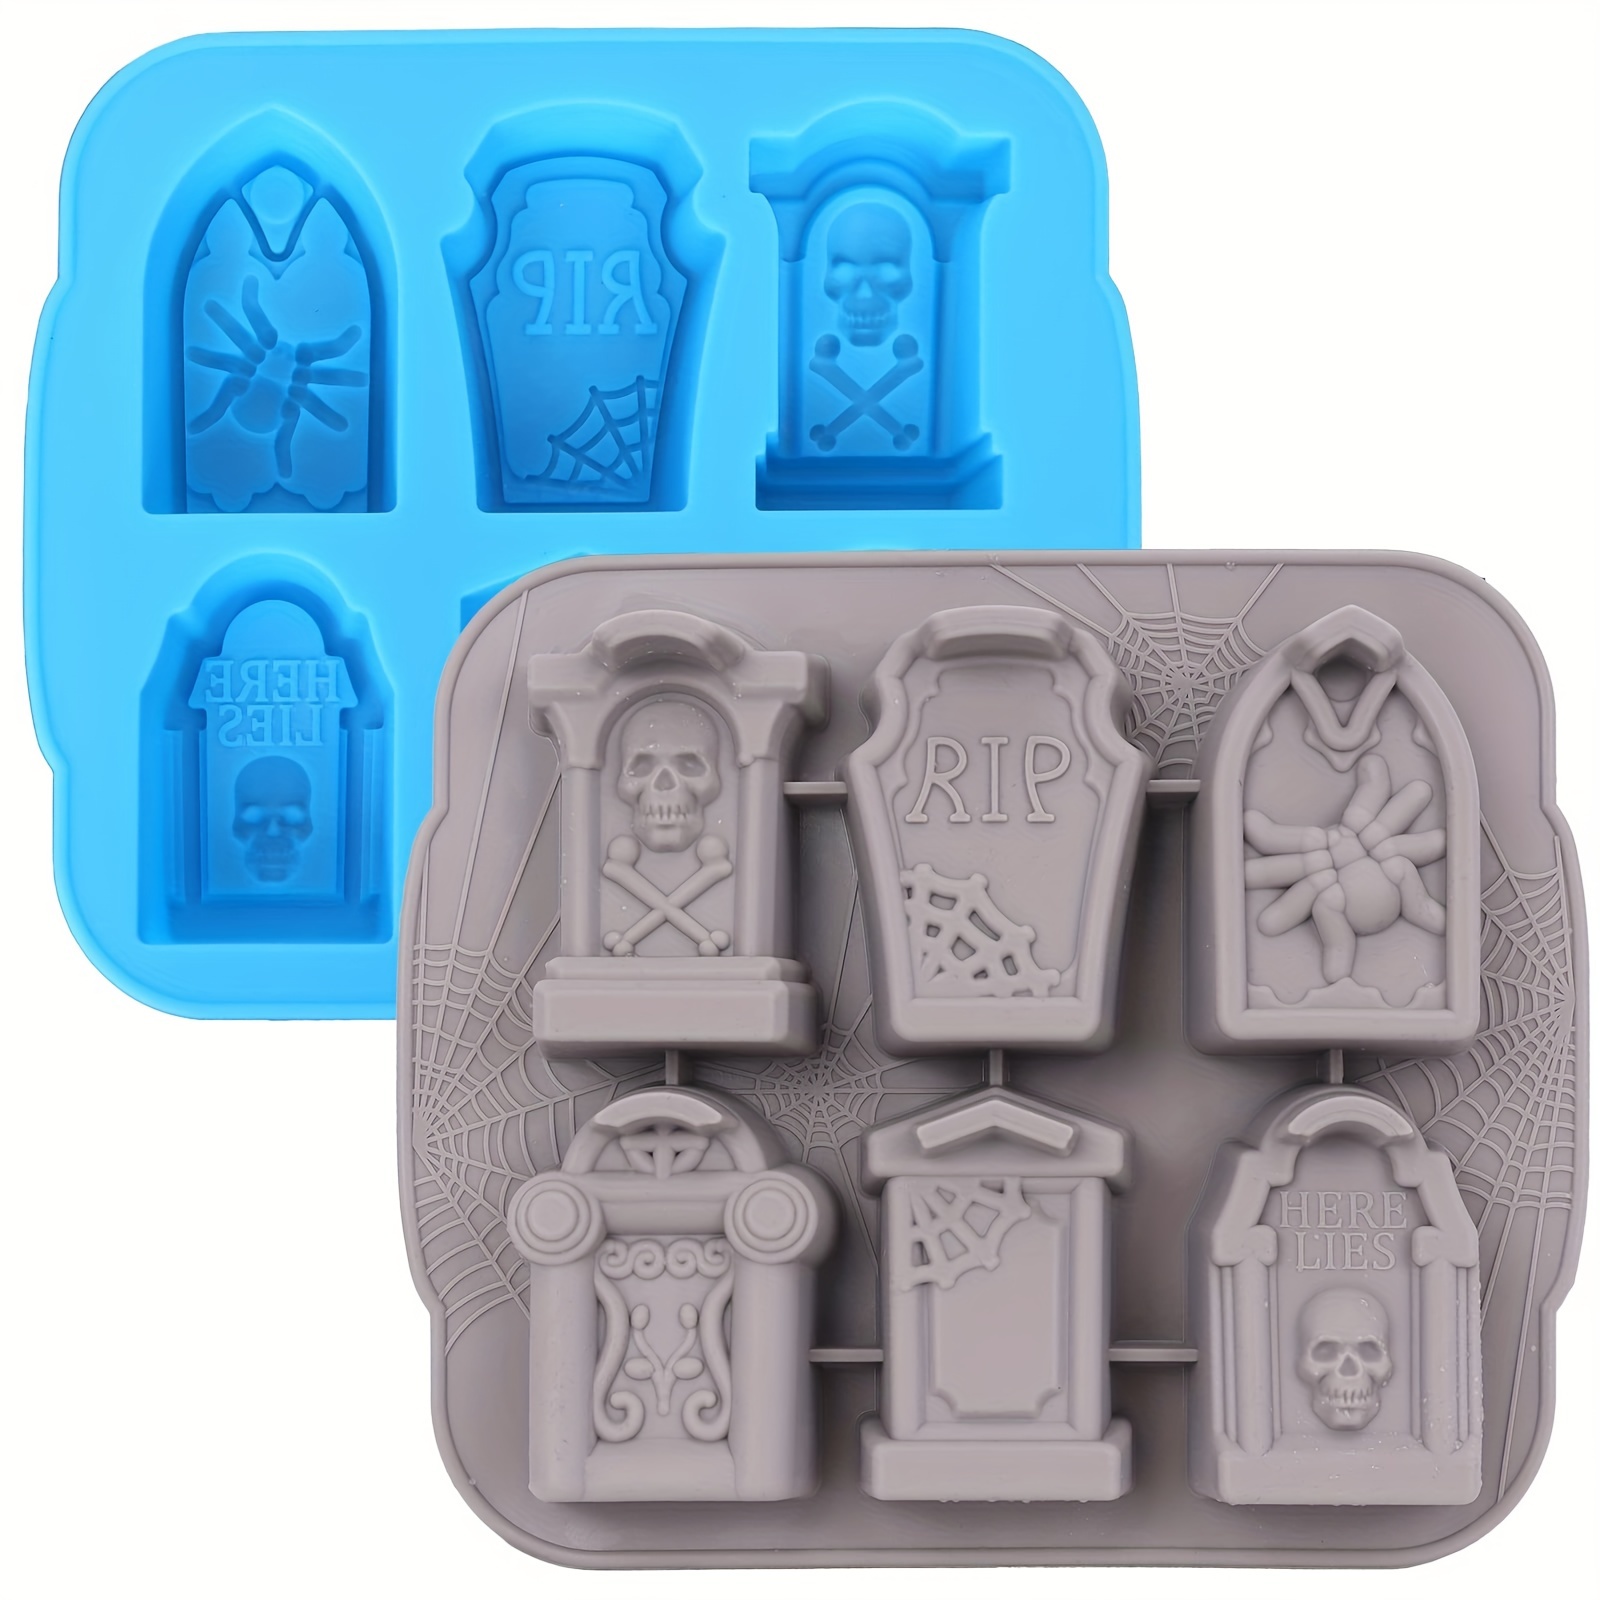 25 Fun Party Ice Cube & Candy Mold Trays  Ice cube candy, Creative ice  cubes, Candy molds